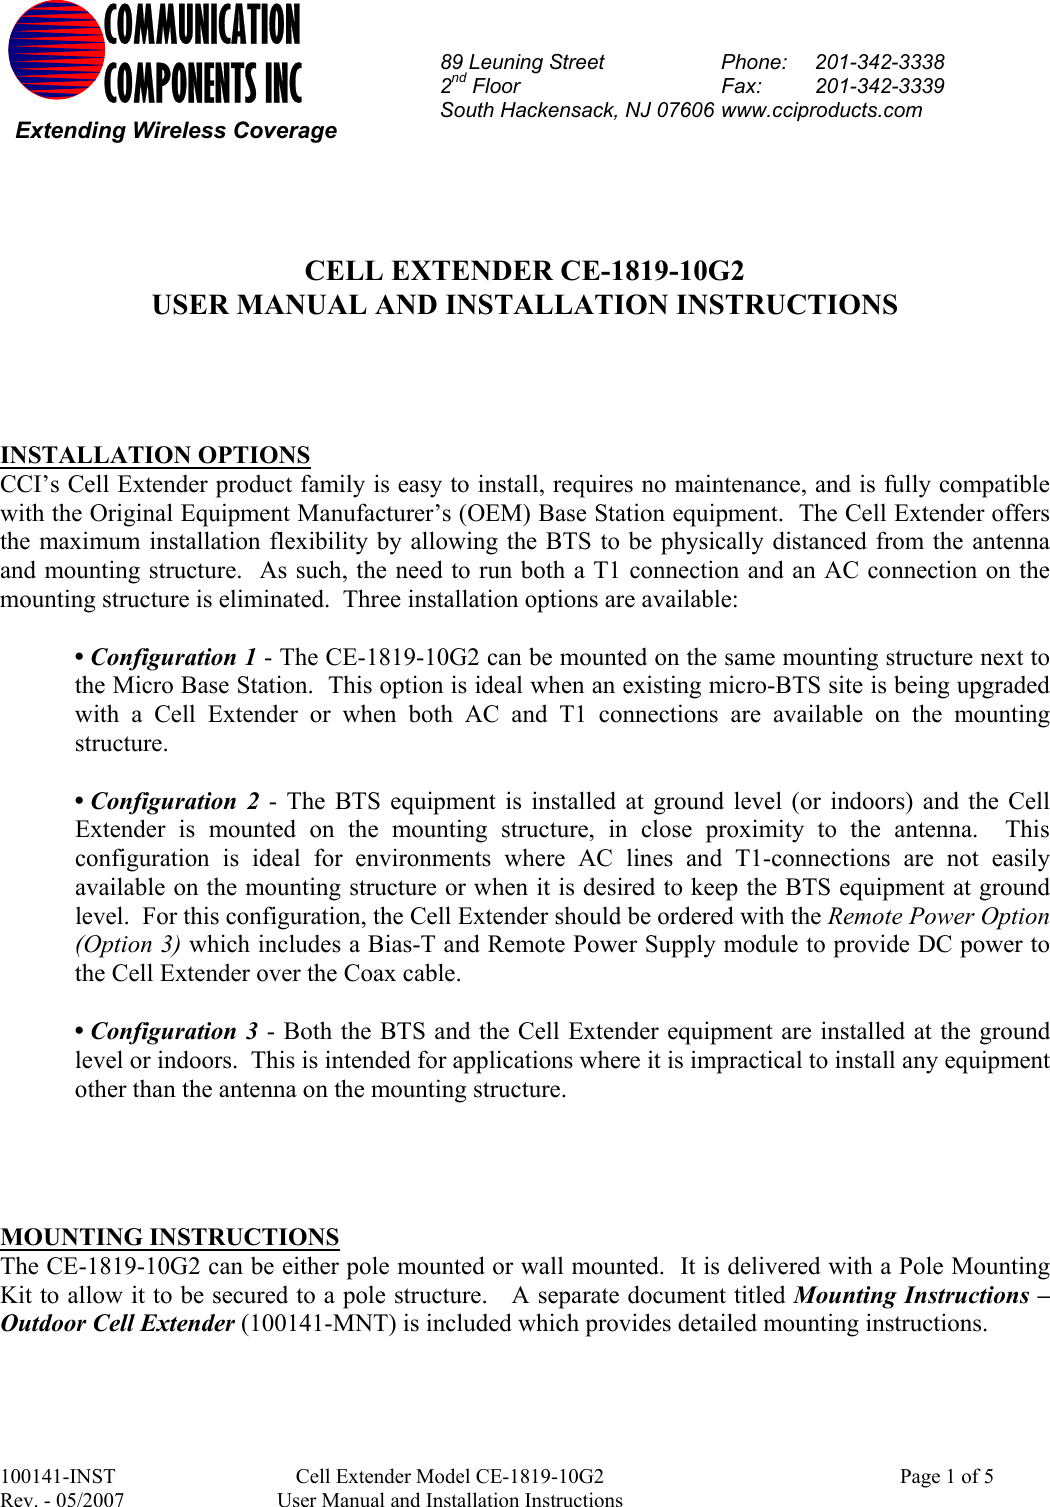 100141-INST  Cell Extender Model CE-1819-10G2    Page 1 of 5  Rev. - 05/2007  User Manual and Installation Instructions            CELL EXTENDER CE-1819-10G2 USER MANUAL AND INSTALLATION INSTRUCTIONS      INSTALLATION OPTIONS CCI’s Cell Extender product family is easy to install, requires no maintenance, and is fully compatible with the Original Equipment Manufacturer’s (OEM) Base Station equipment.  The Cell Extender offers the maximum installation flexibility by allowing the BTS to be physically distanced from the antenna and mounting structure.  As such, the need to run both a T1 connection and an AC connection on the mounting structure is eliminated.  Three installation options are available:   • Configuration 1 - The CE-1819-10G2 can be mounted on the same mounting structure next to the Micro Base Station.  This option is ideal when an existing micro-BTS site is being upgraded with a Cell Extender or when both AC and T1 connections are available on the mounting structure.    • Configuration 2 - The BTS equipment is installed at ground level (or indoors) and the Cell Extender is mounted on the mounting structure, in close proximity to the antenna.  This configuration is ideal for environments where AC lines and T1-connections are not easily available on the mounting structure or when it is desired to keep the BTS equipment at ground level.  For this configuration, the Cell Extender should be ordered with the Remote Power Option (Option 3) which includes a Bias-T and Remote Power Supply module to provide DC power to the Cell Extender over the Coax cable.  • Configuration 3 - Both the BTS and the Cell Extender equipment are installed at the ground level or indoors.  This is intended for applications where it is impractical to install any equipment other than the antenna on the mounting structure.     MOUNTING INSTRUCTIONS The CE-1819-10G2 can be either pole mounted or wall mounted.  It is delivered with a Pole Mounting Kit to allow it to be secured to a pole structure.   A separate document titled Mounting Instructions – Outdoor Cell Extender (100141-MNT) is included which provides detailed mounting instructions.   COMMUNICATION COMPONENTS INC Extending Wireless Coverage 89 Leuning Street  Phone:  201-342-3338 2nd Floor  Fax:     201-342-3339 South Hackensack, NJ 07606 www.cciproducts.com 